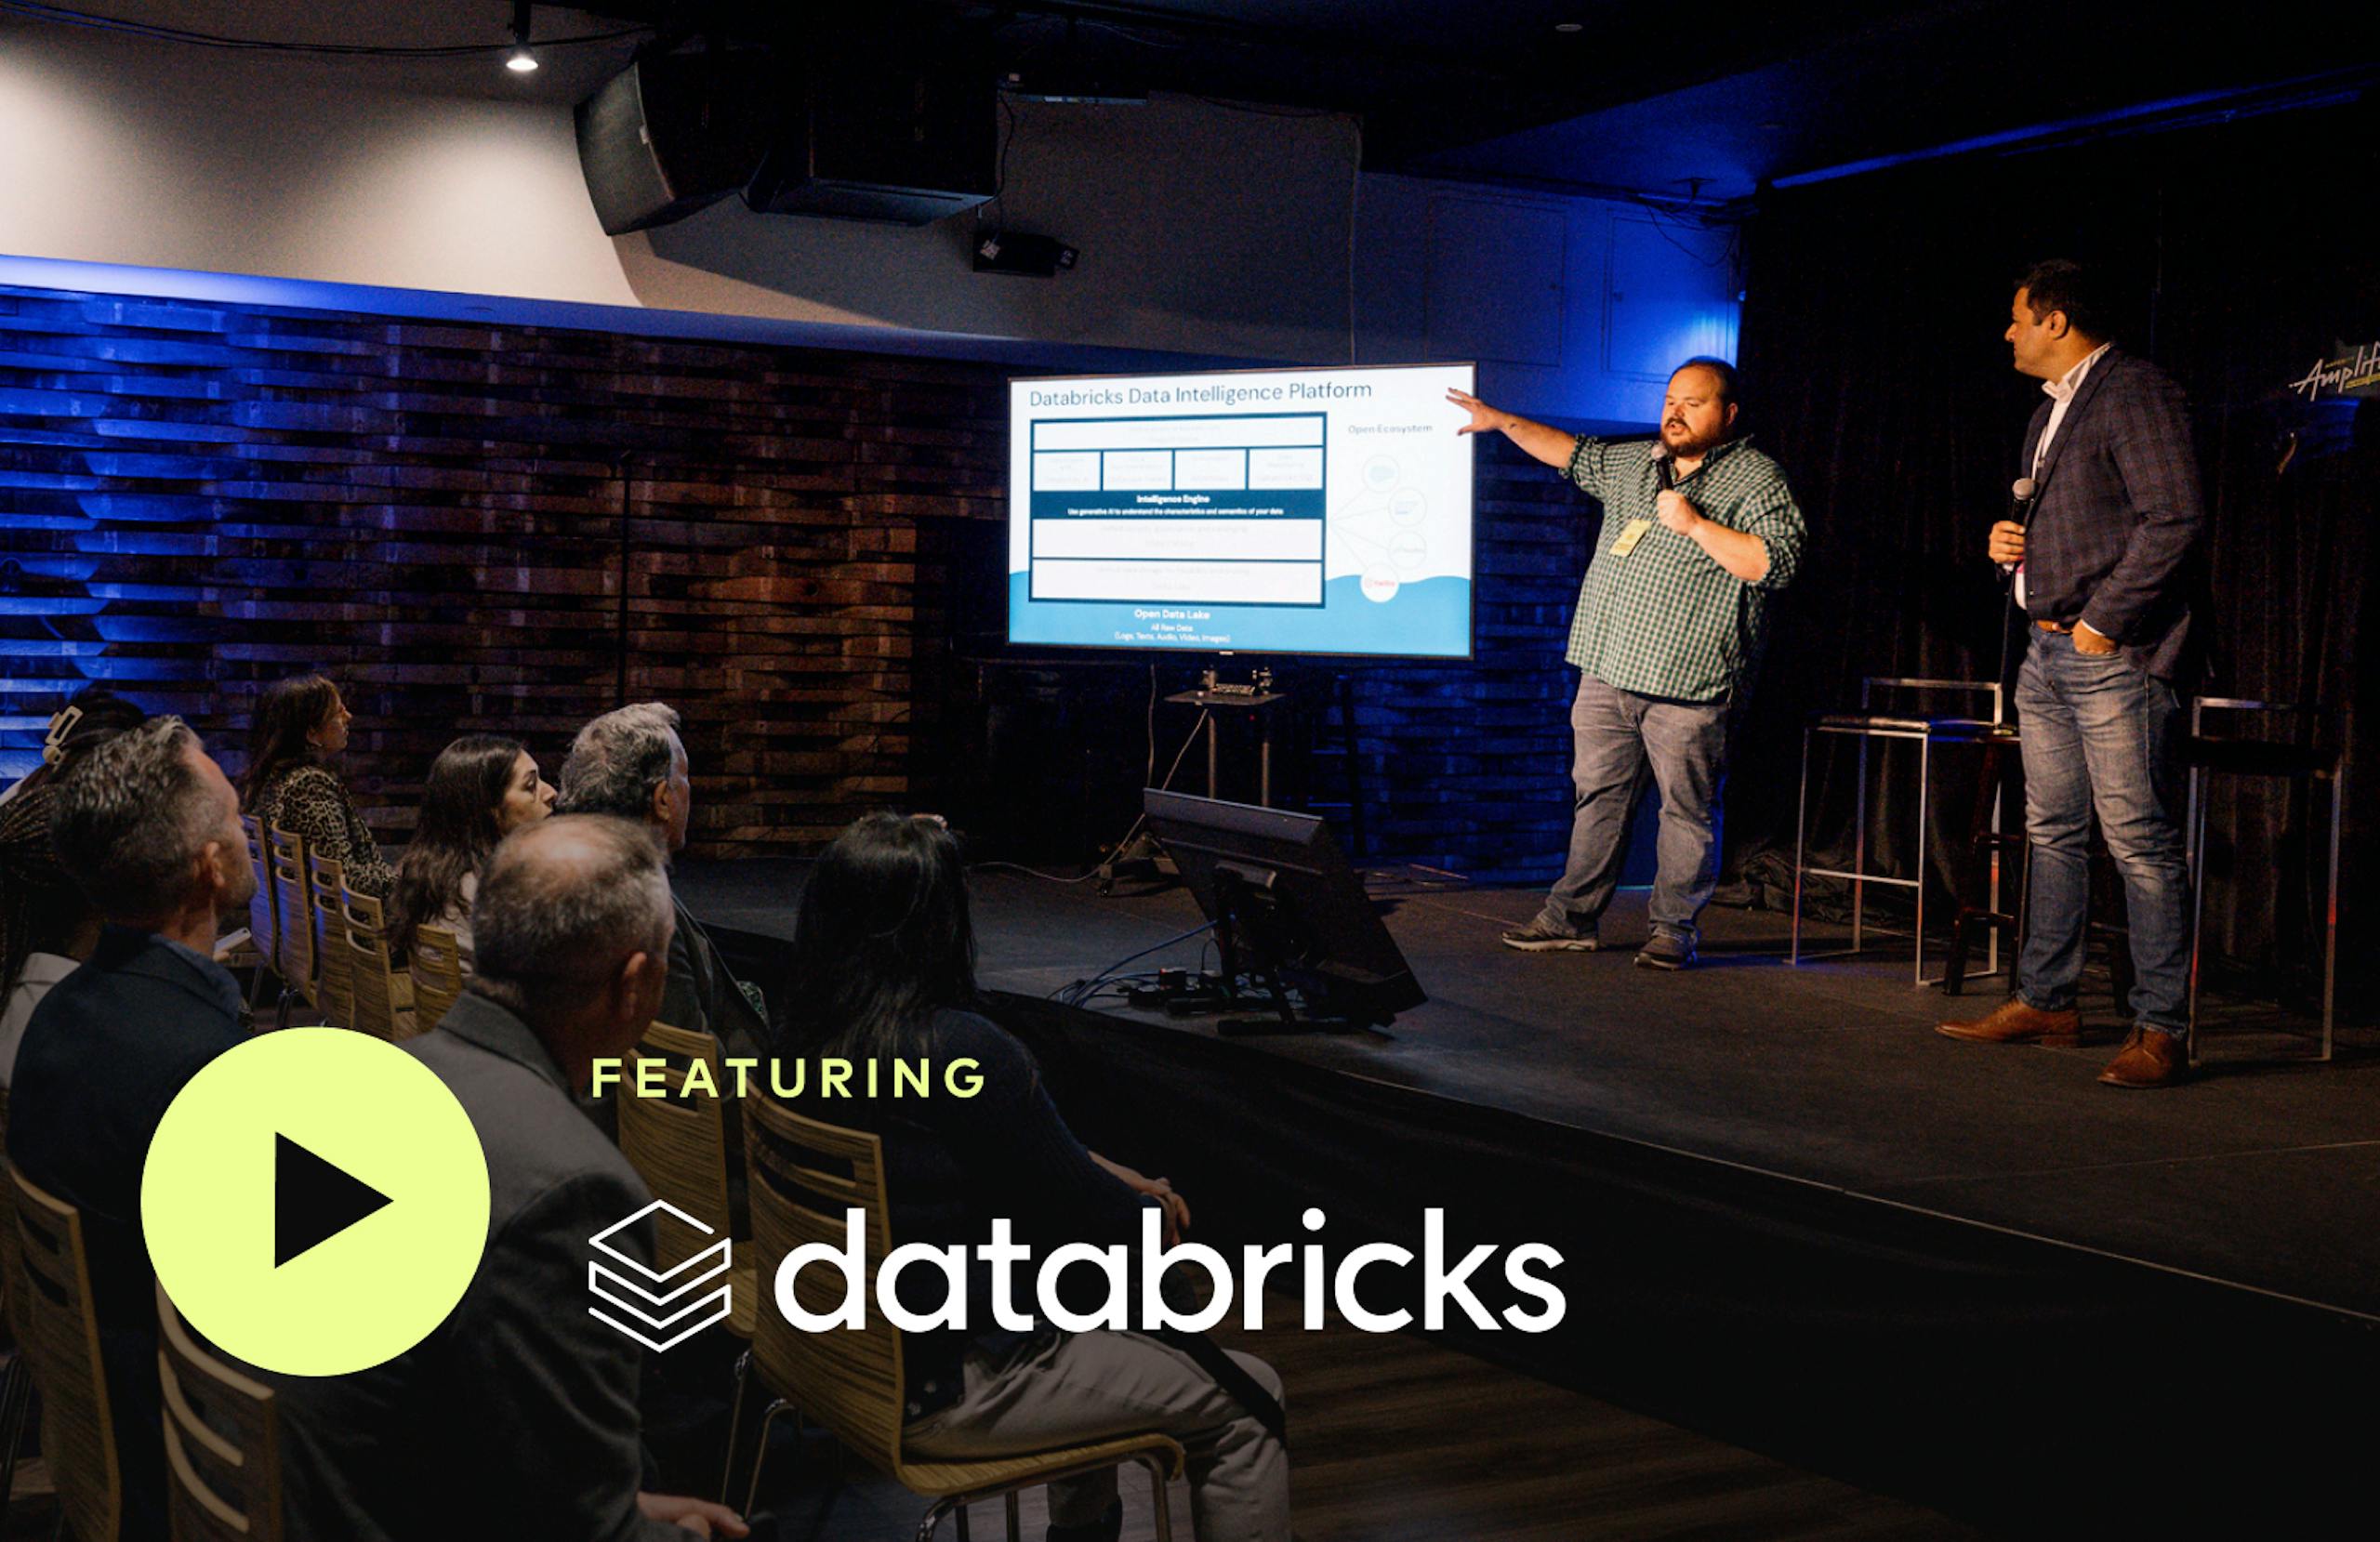 Caleb from Amperity and Shiv from Databricks onstage at Amplify. Featuring Databricks.